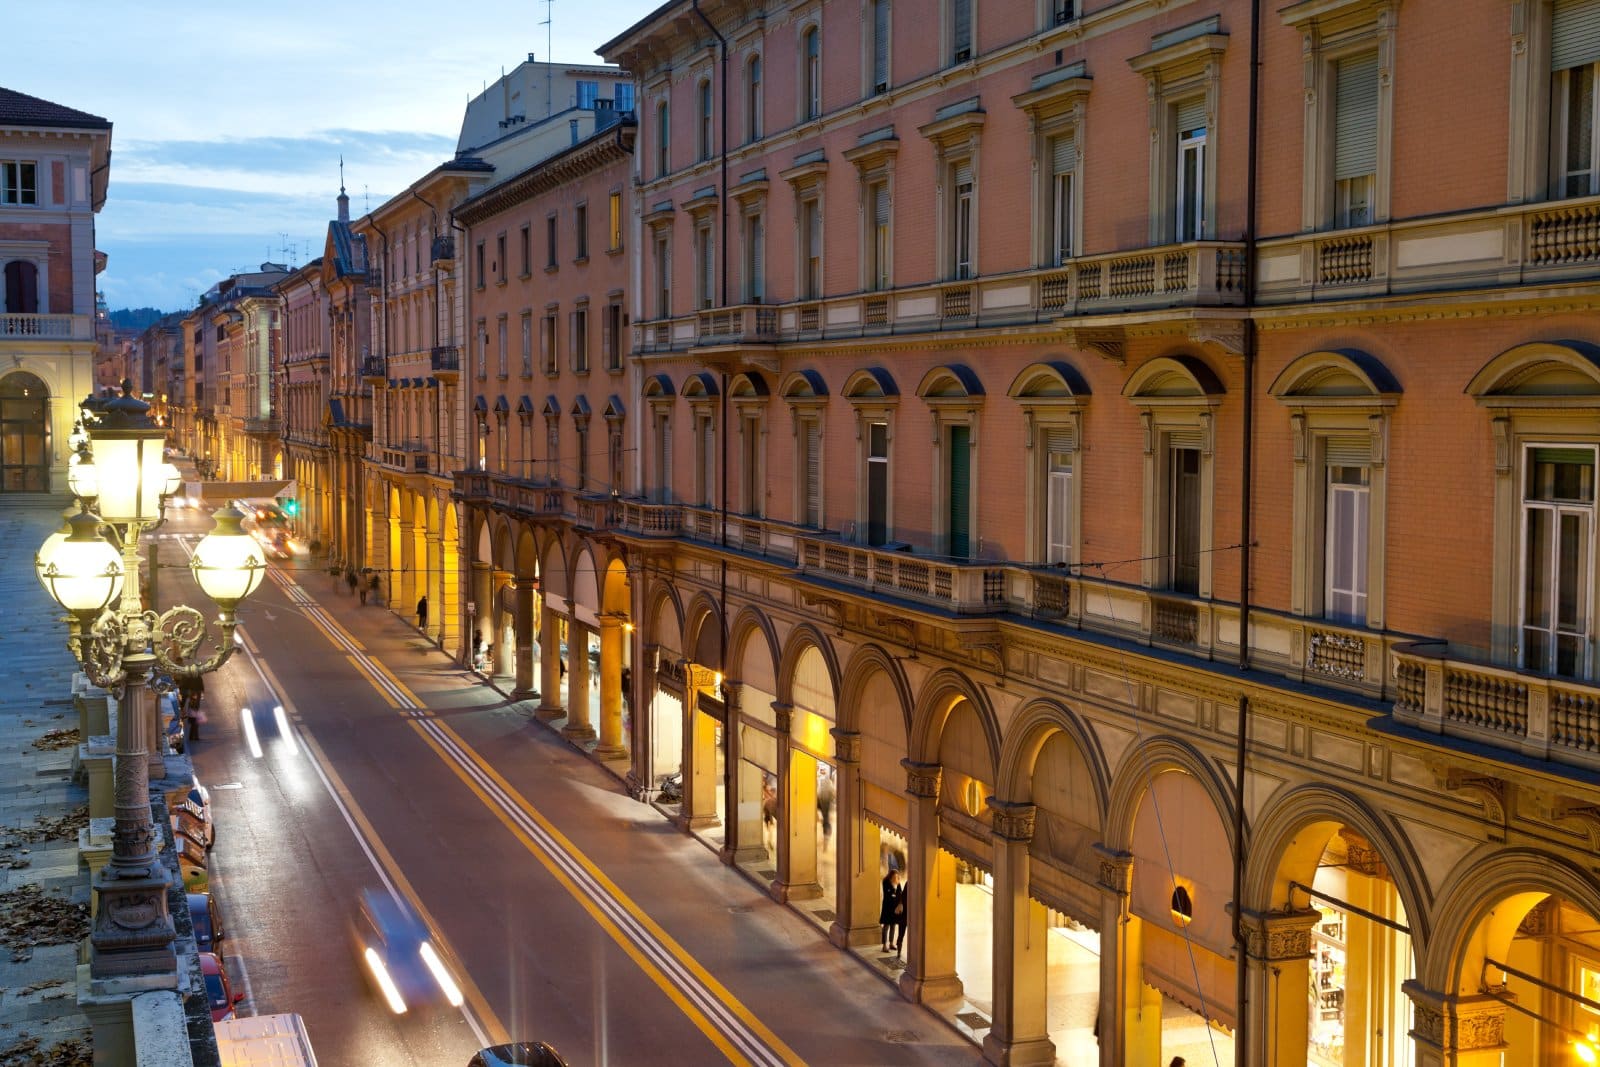 <p class="wp-caption-text">Image Credit: Shutterstock / vvoe</p>  <p><span>After exploring the city’s history, take a leisurely walk under the porticoes of Via dell’Indipendenza. These covered walkways are architecturally breathtaking and a nod to Bologna’s innovative urban planning. Stretching for many kilometers, they provide shelter from the elements and connect various parts of the city. This walk offers a unique perspective of Bologna, lined with shops, cafes, and historic buildings, allowing for exploration and relaxation. </span></p>